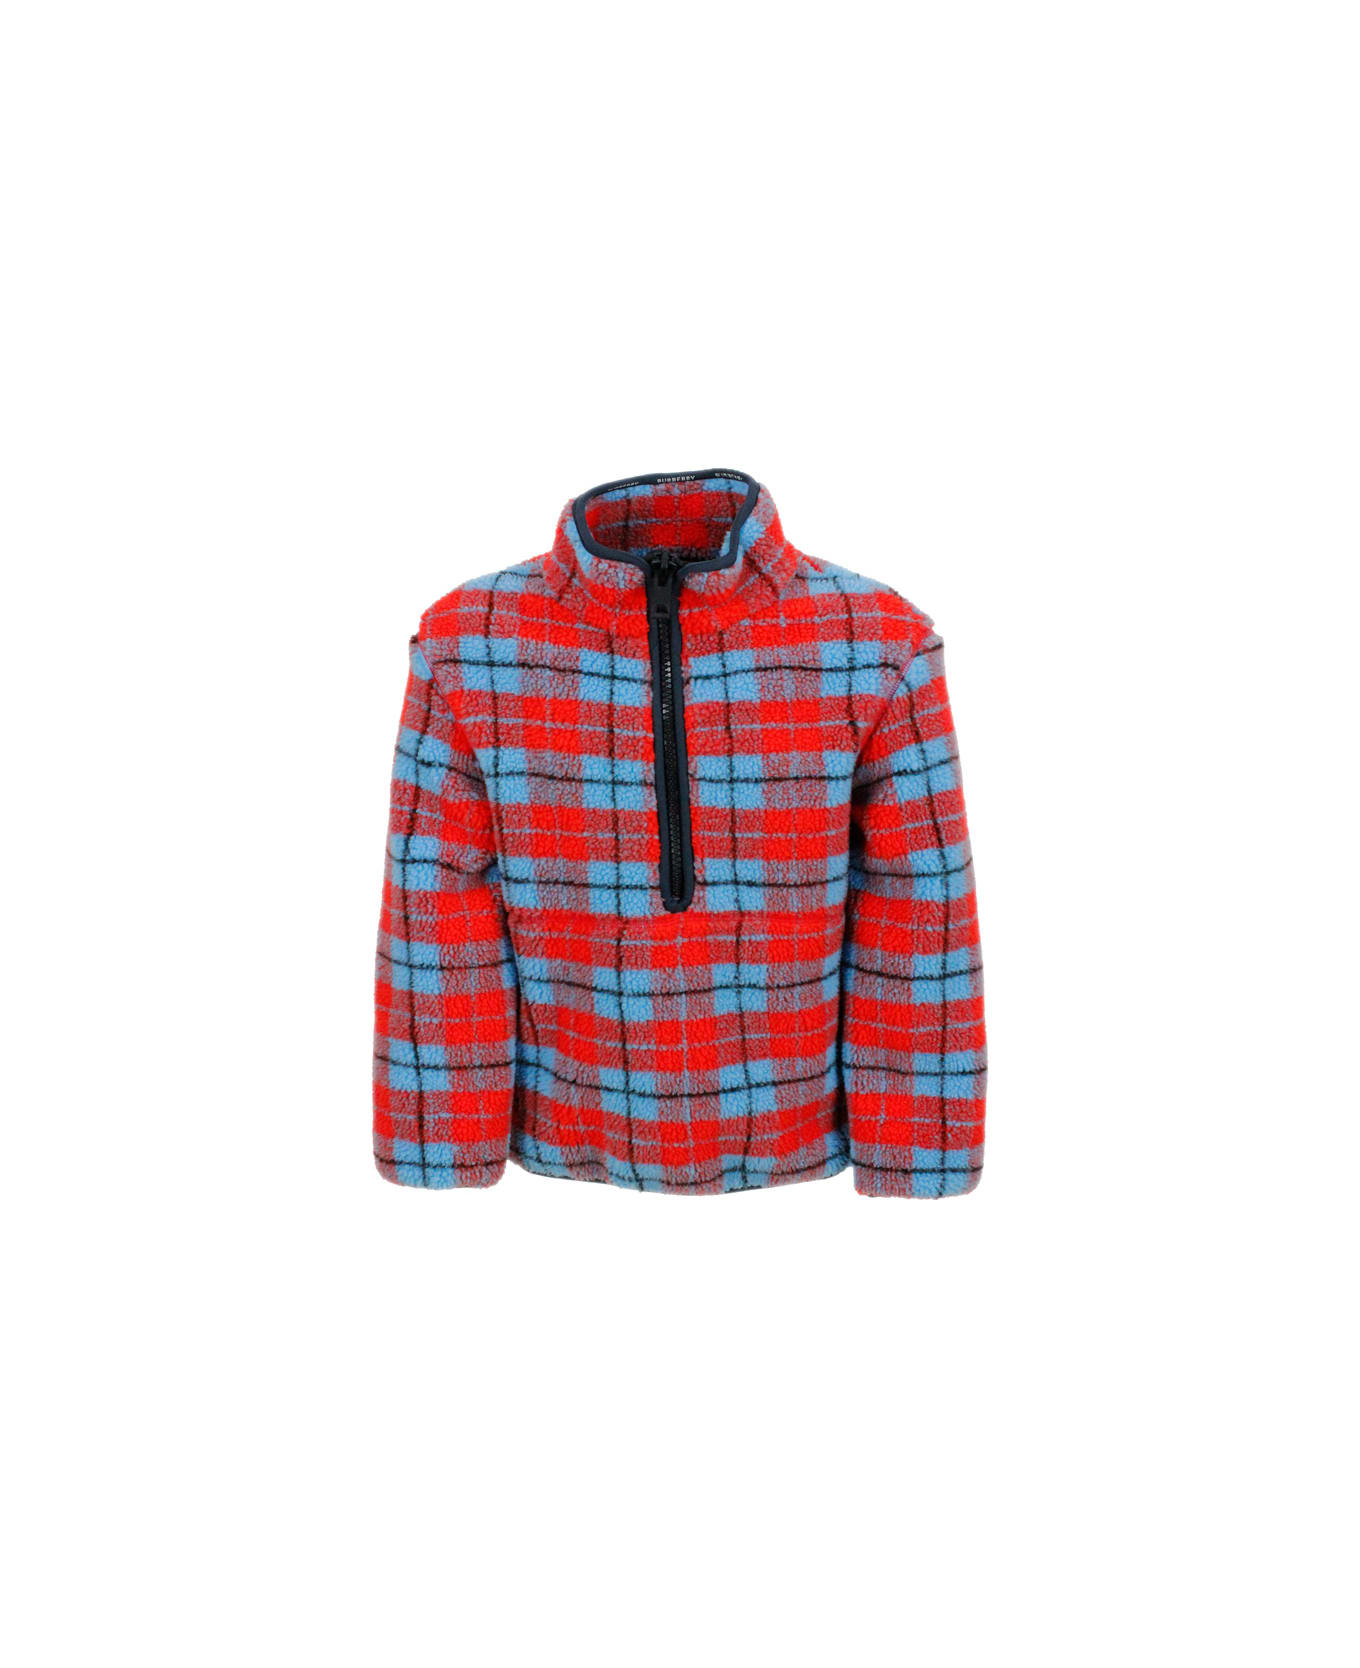 Burberry Jacket Made Of Cotton Fleece With Tartan Motif In Bright Colors And Half Zip Closure - Red